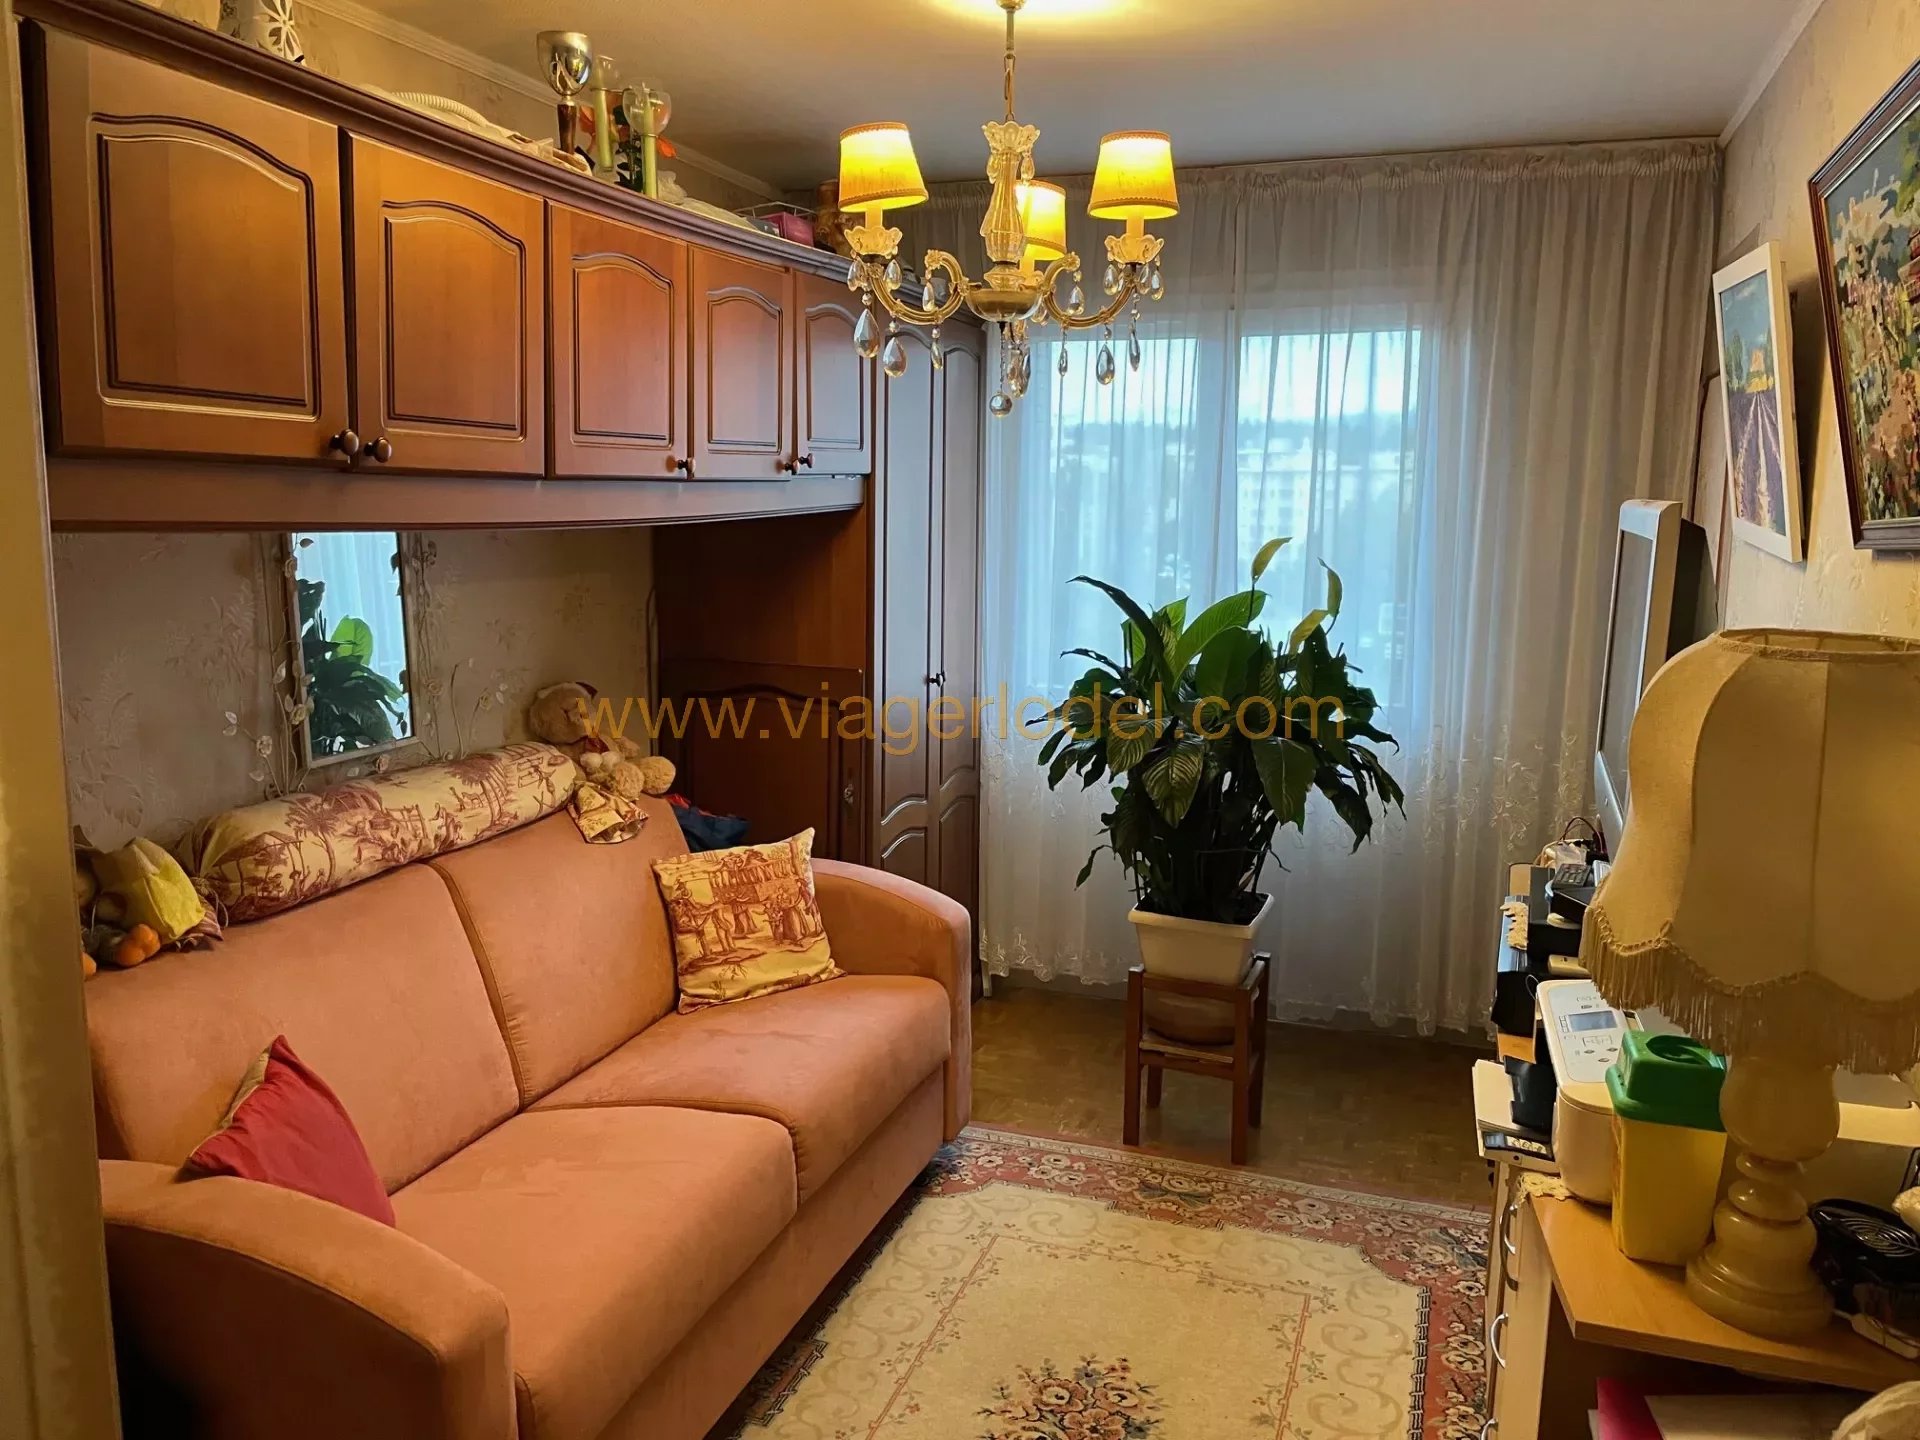 Ref.: 9297 - LIFE ANNUITY - NICE (06) - Occupied 3-room flat